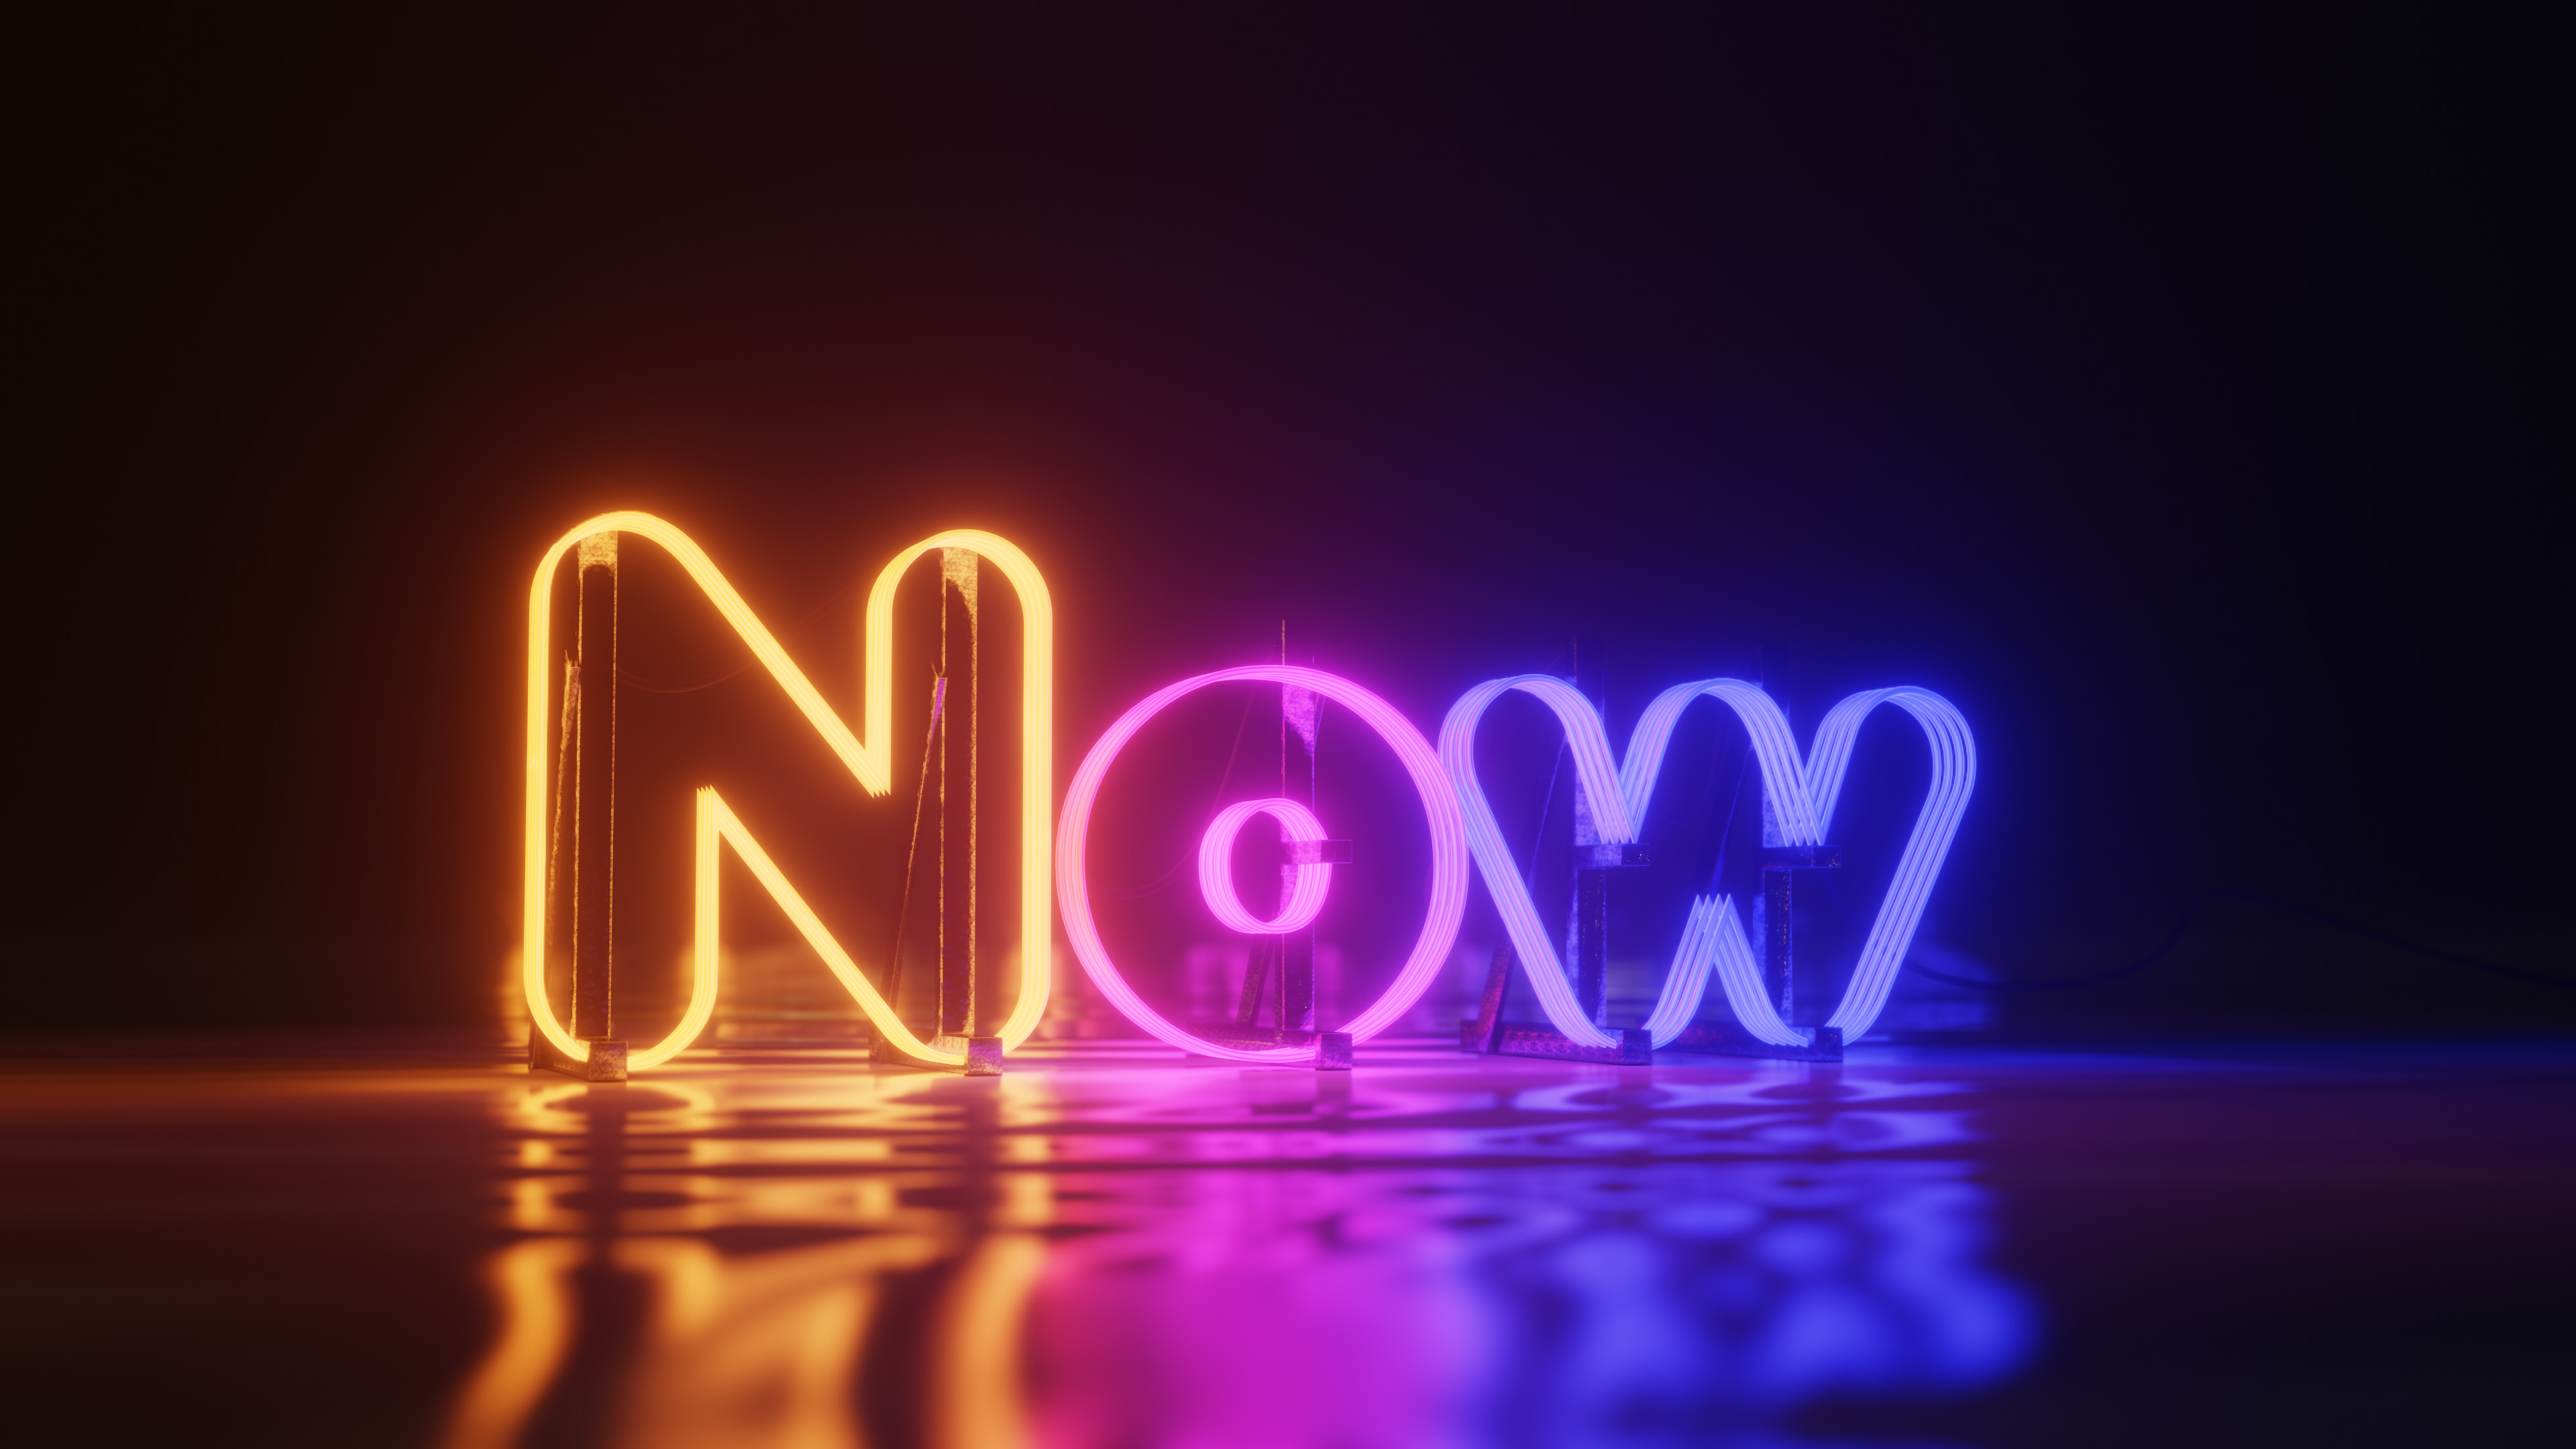 General 3840x2160 CGI digital art neon colorful neon sign typography reflection 4K